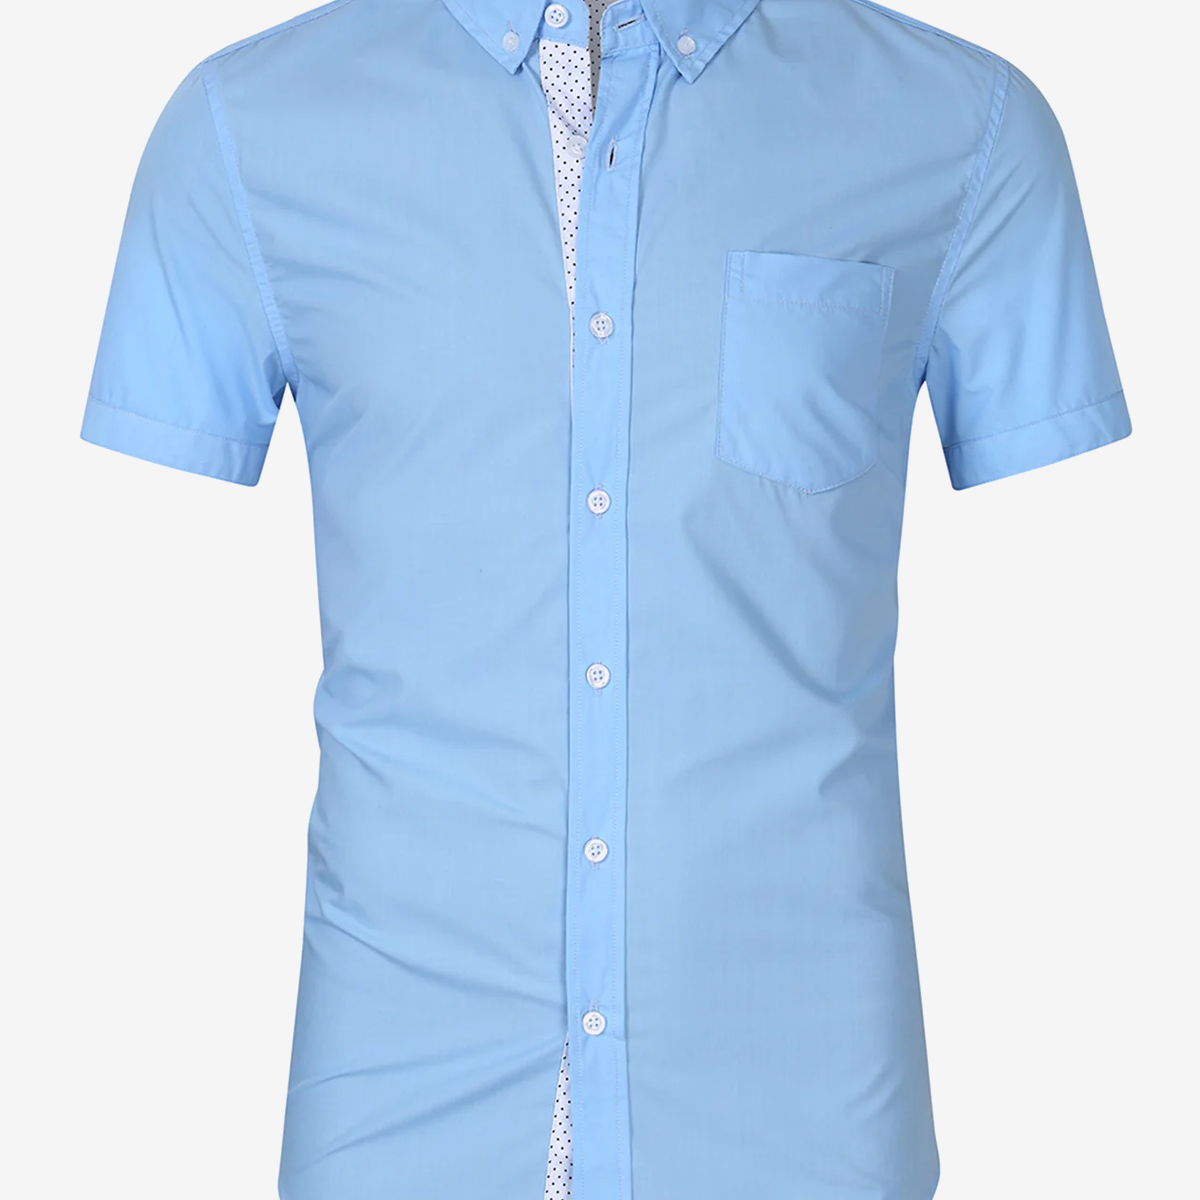 Men's Casual Solid Color Breathable Cotton Dress Short Sleeve Shirt